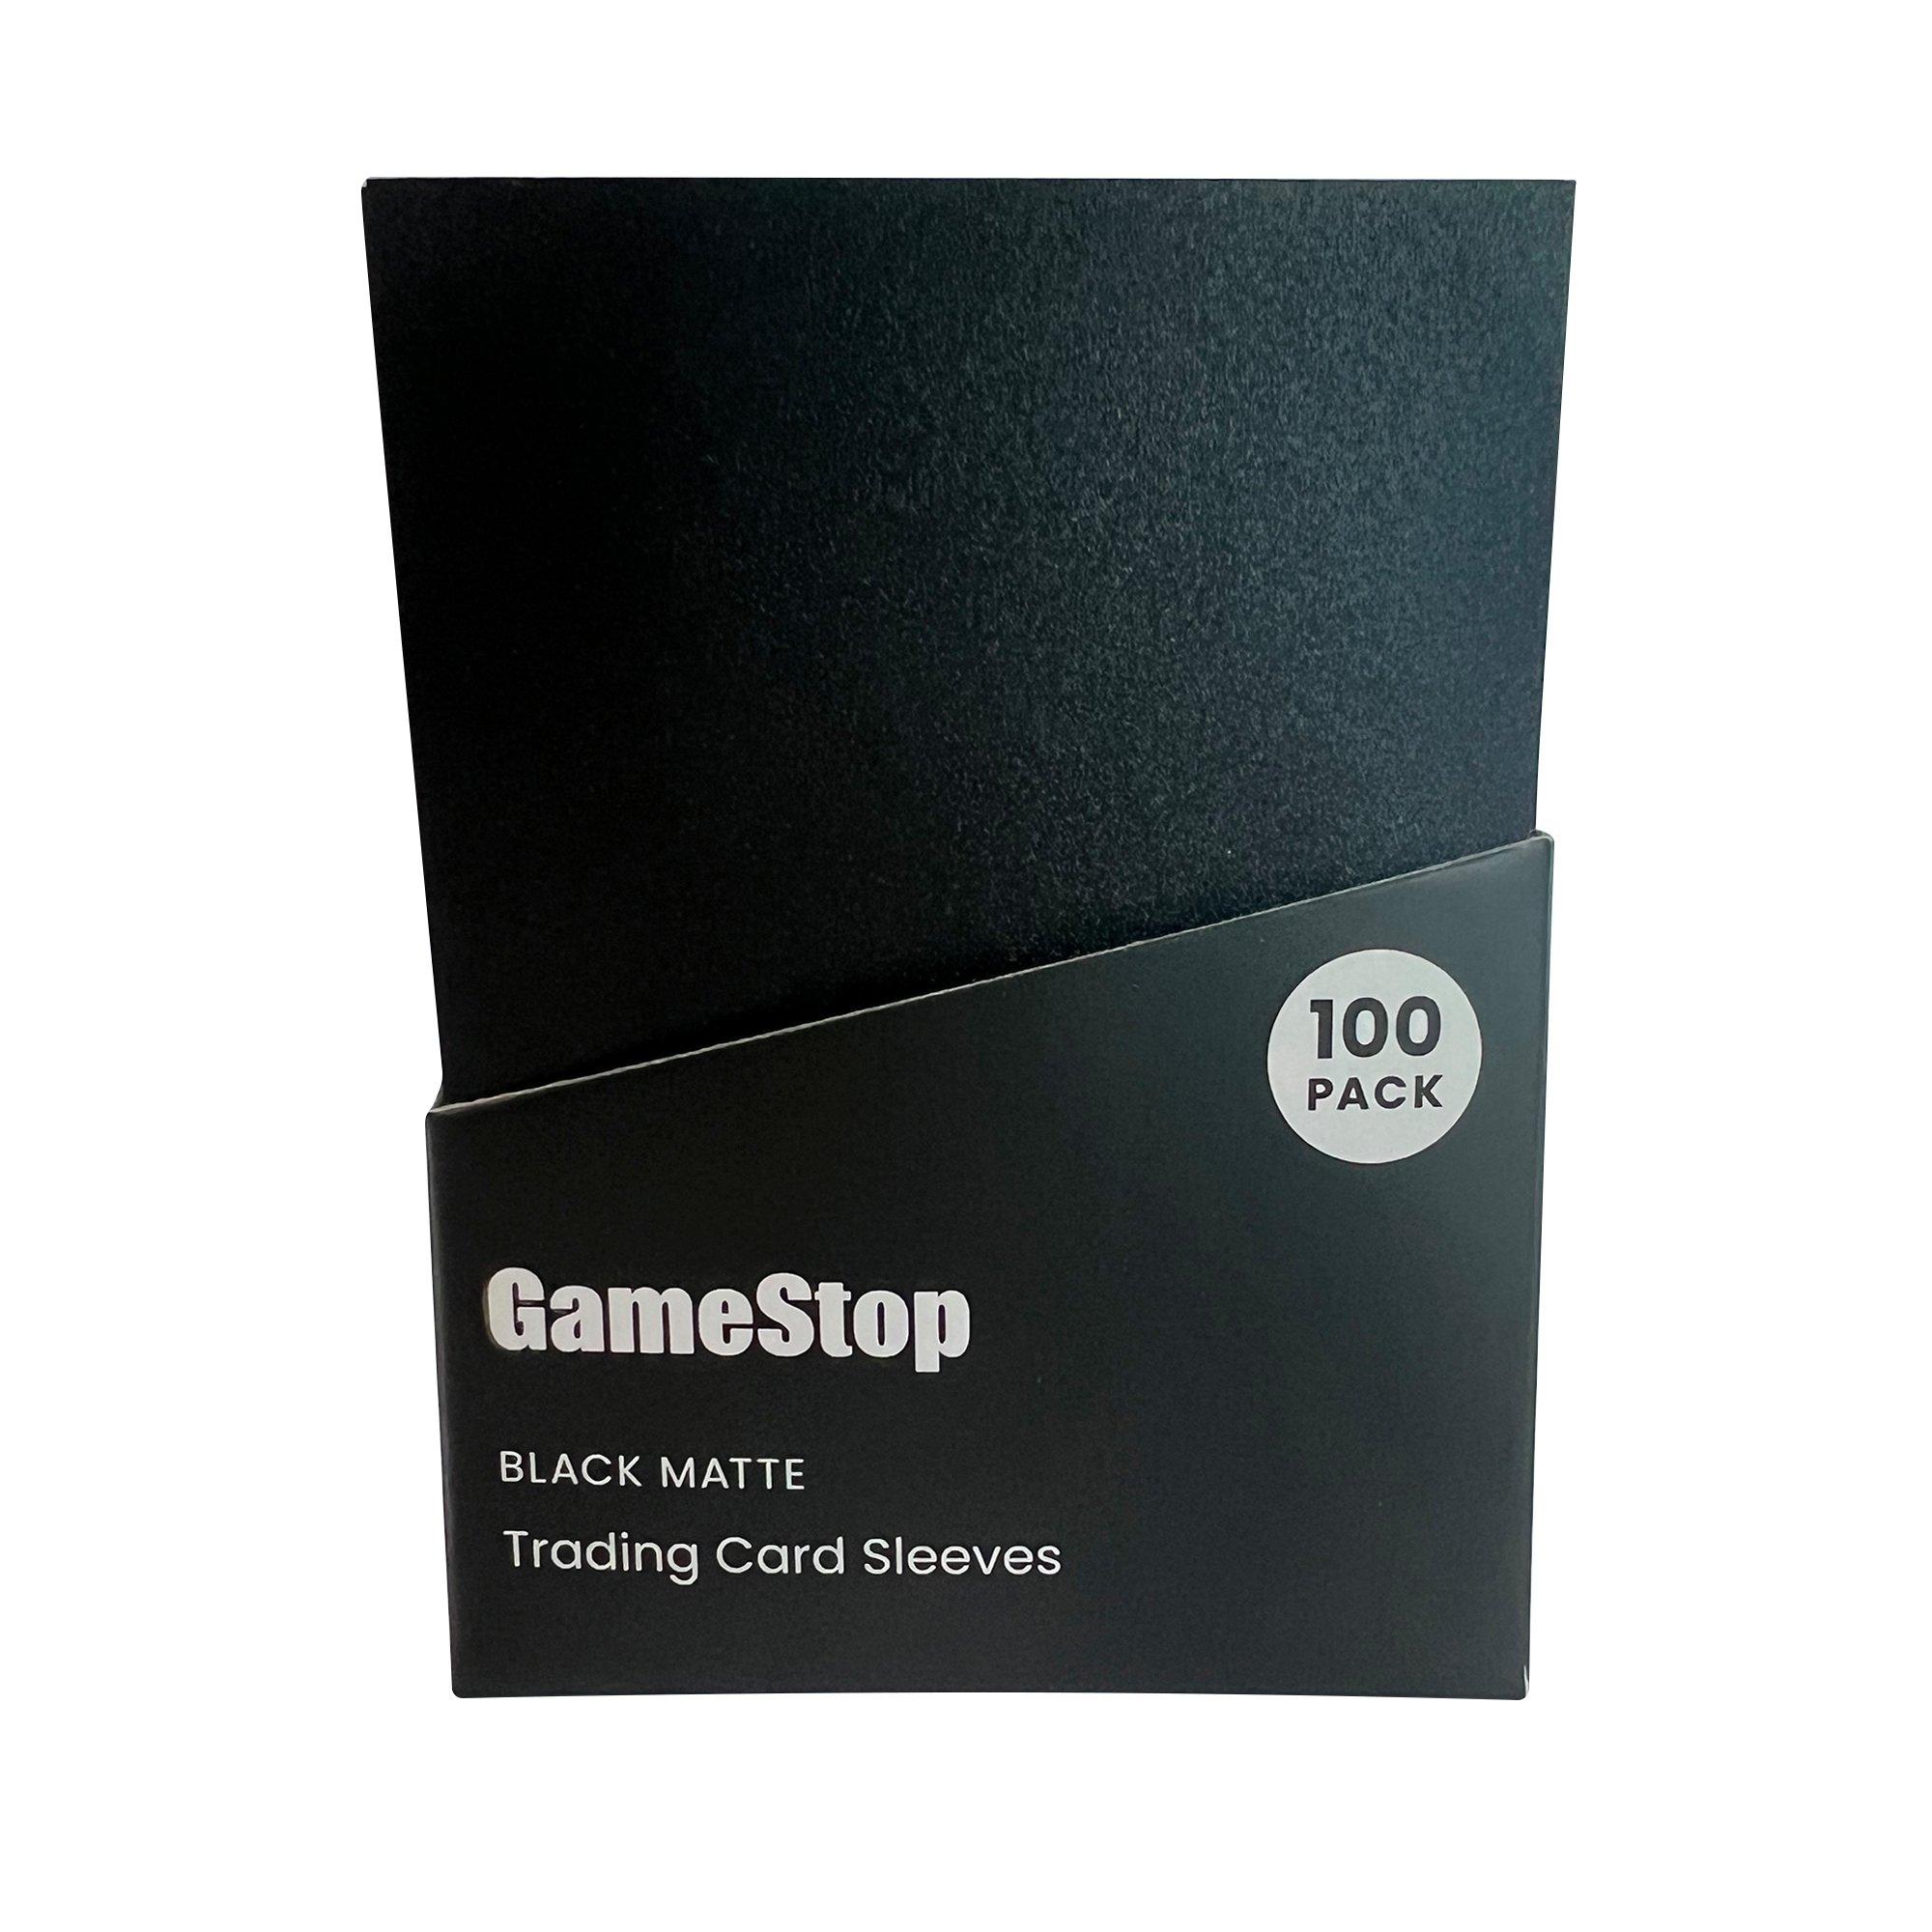 Gamegenic: Matte Double Sleeve Pack 100